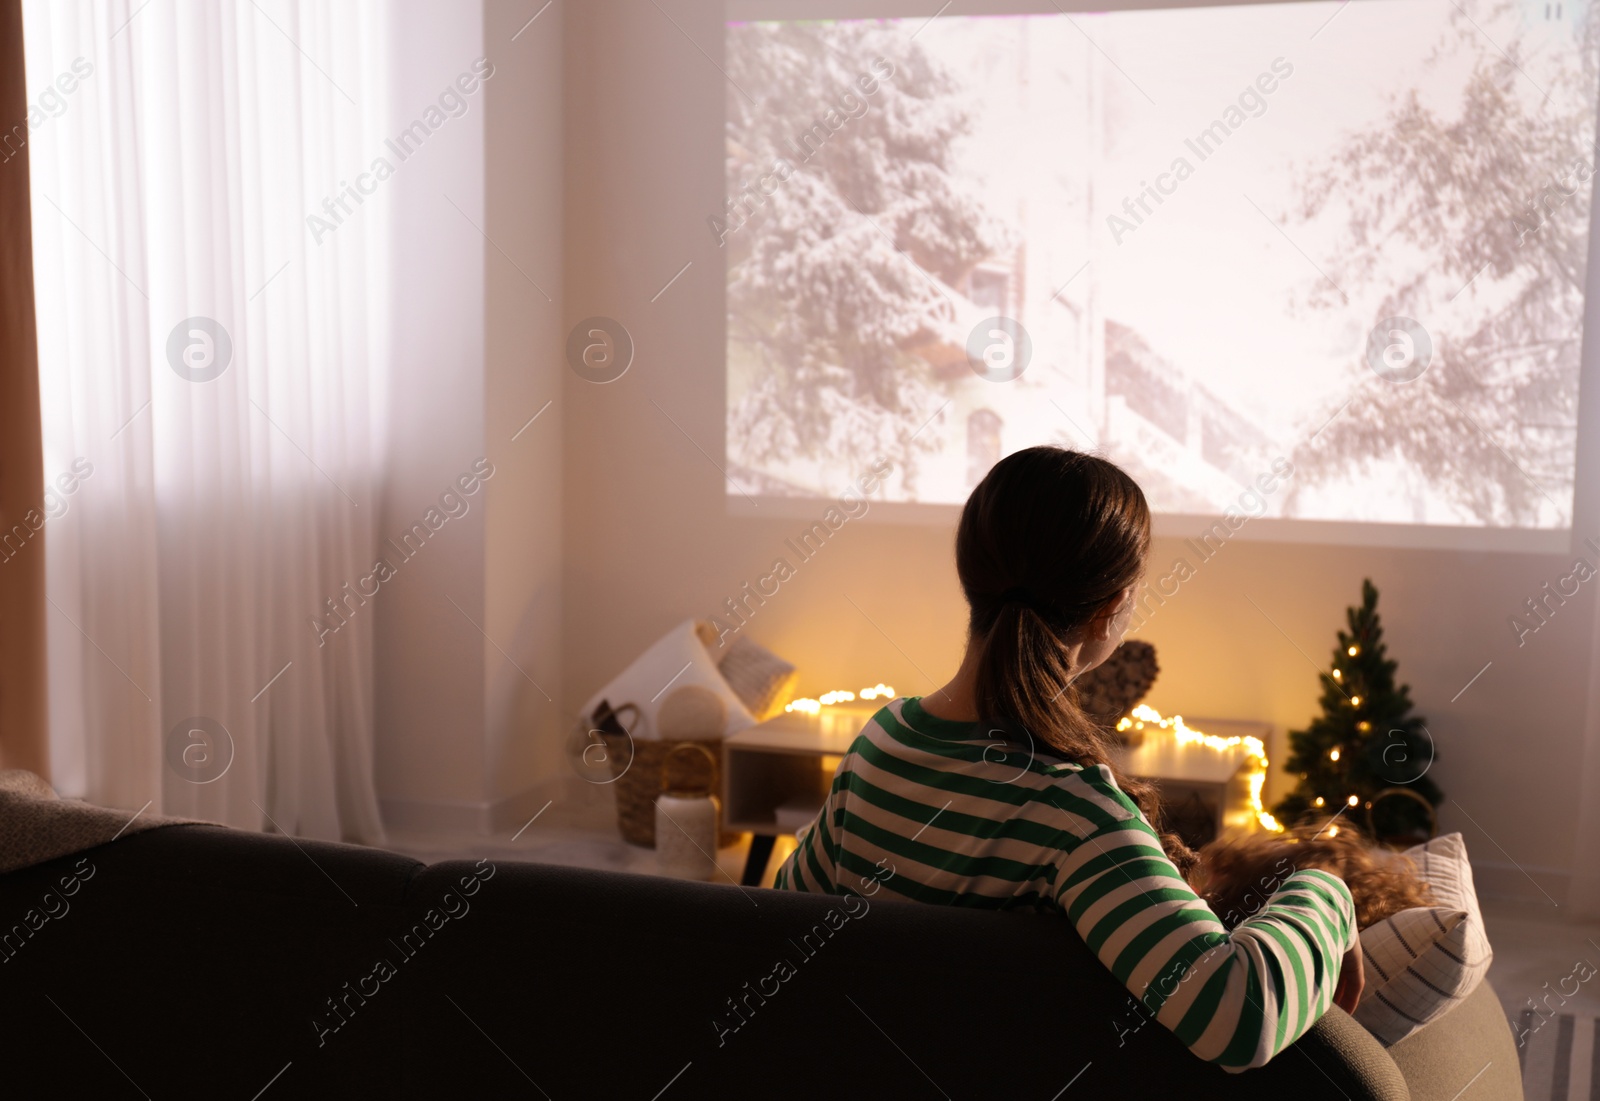 Photo of Mother and son watching Christmas movie via video projector at home, back view